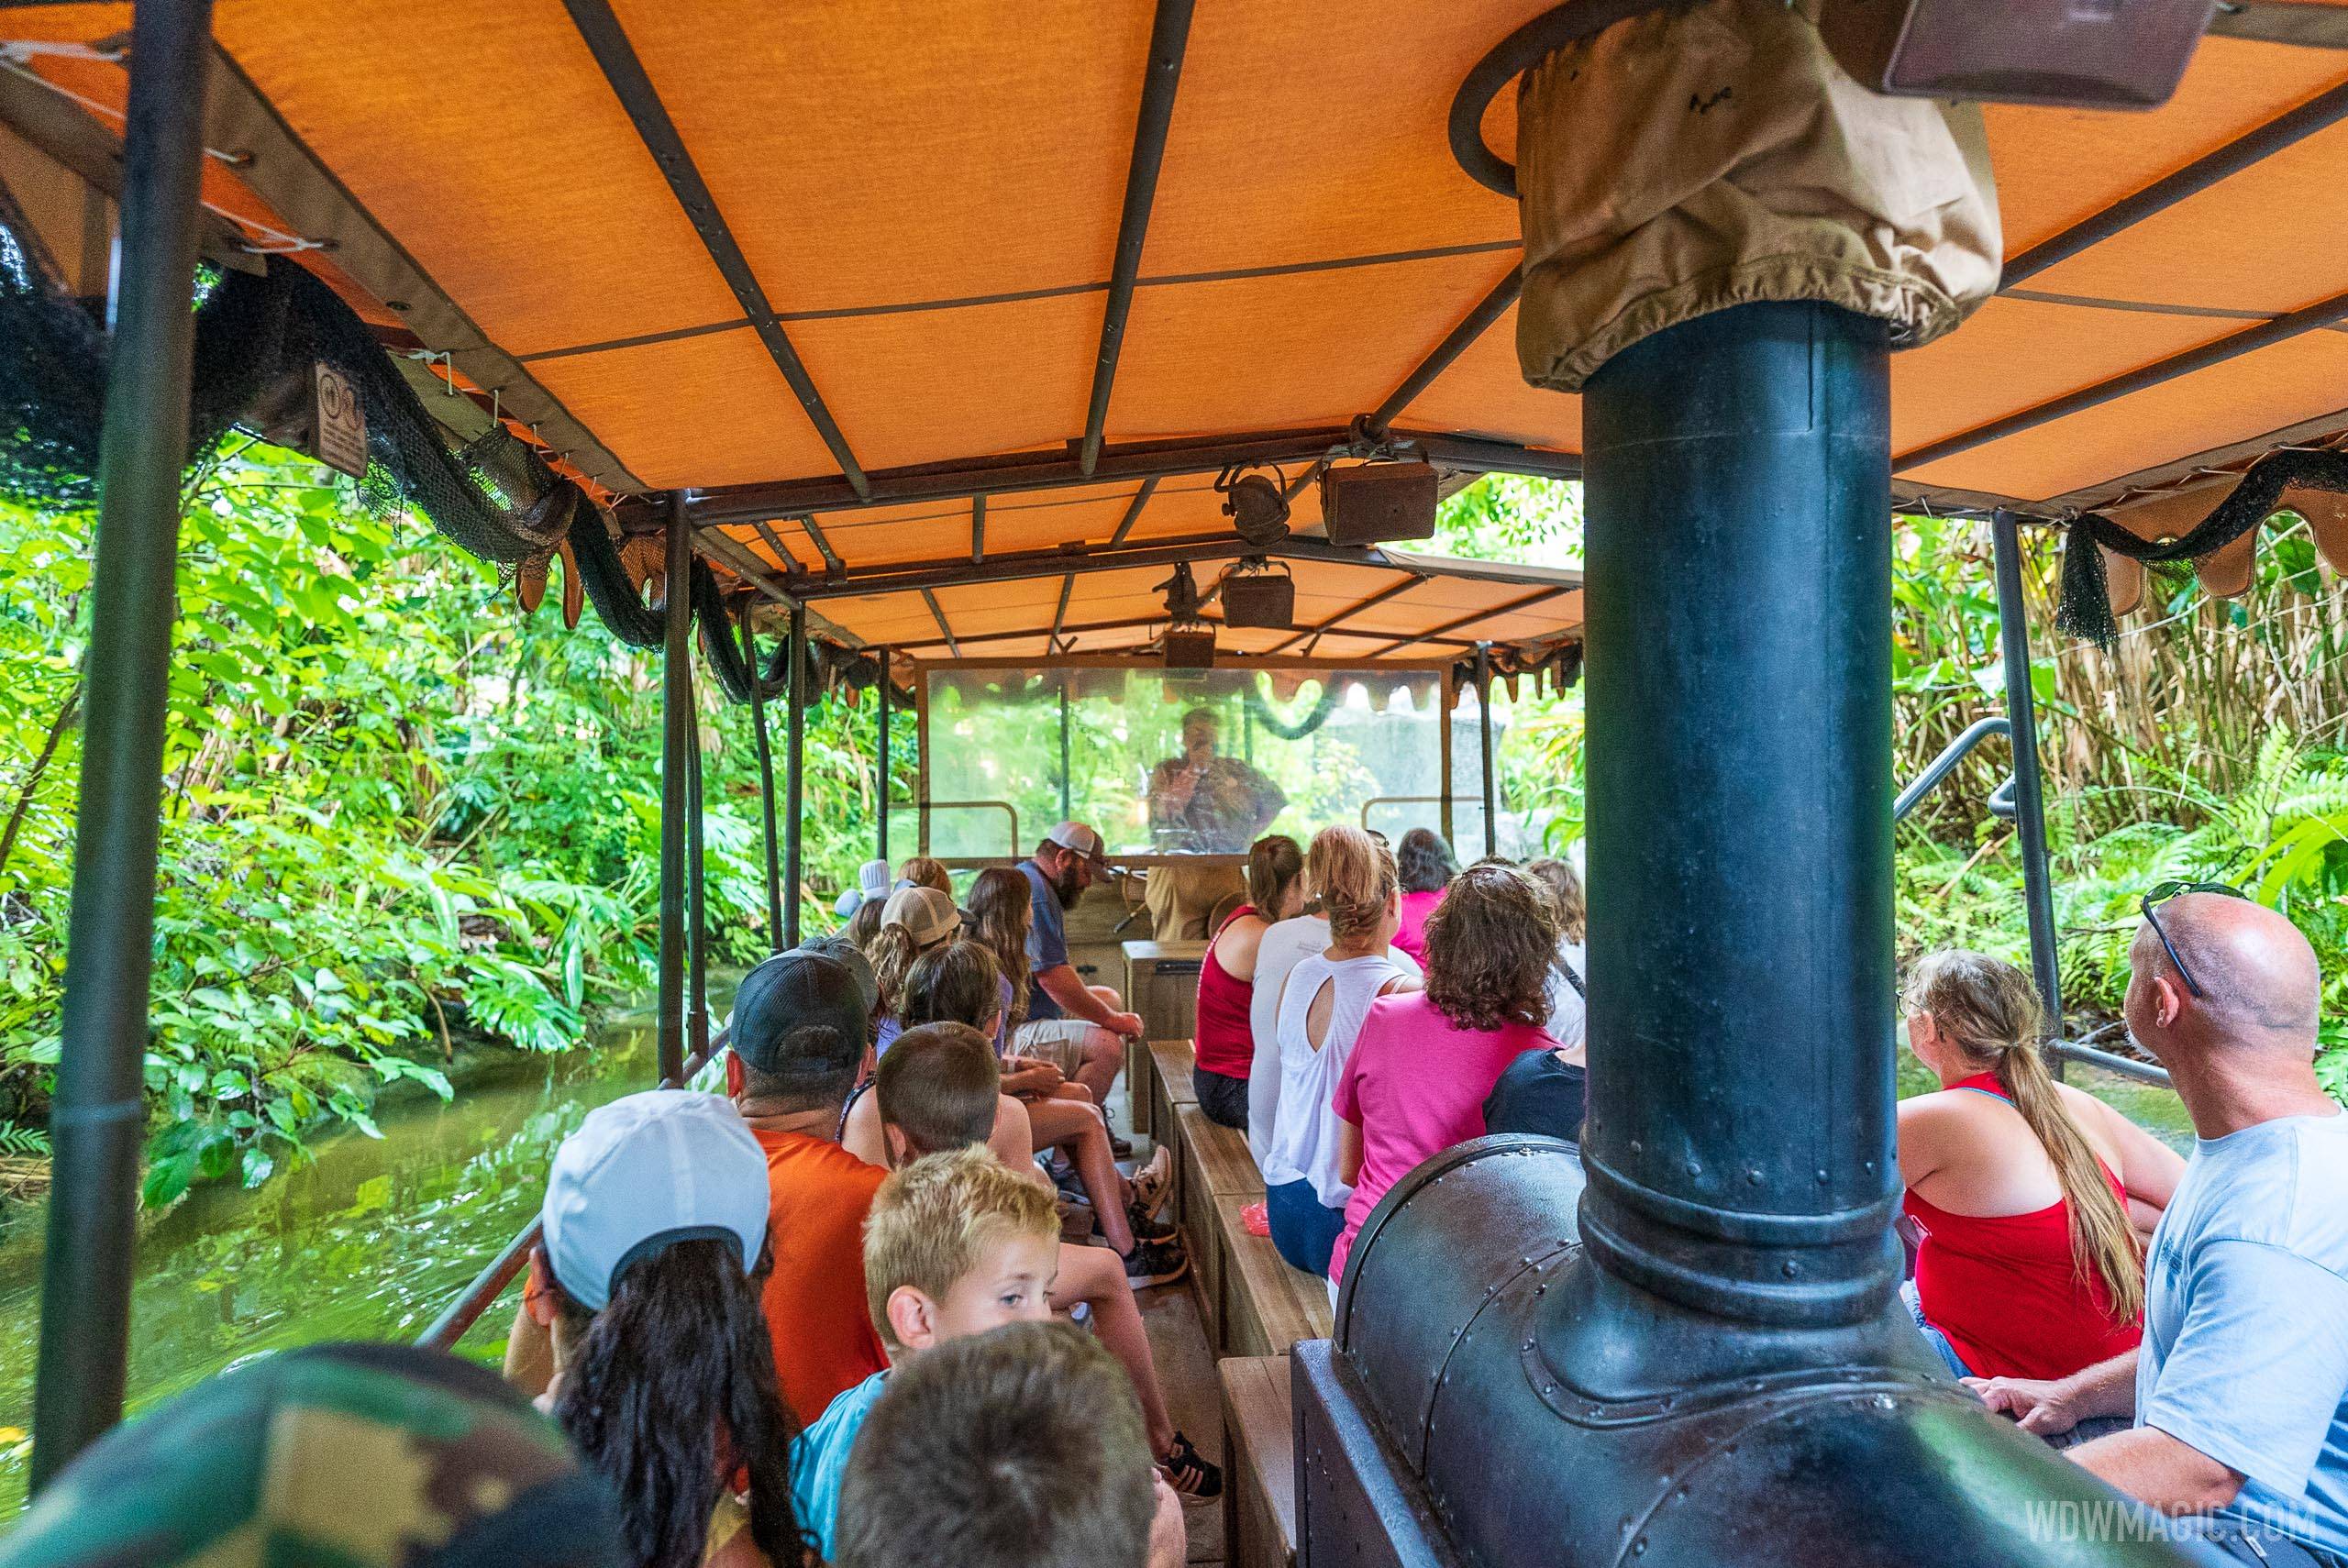 Guests riding the Jungle Cruise with mask requirement removed in June